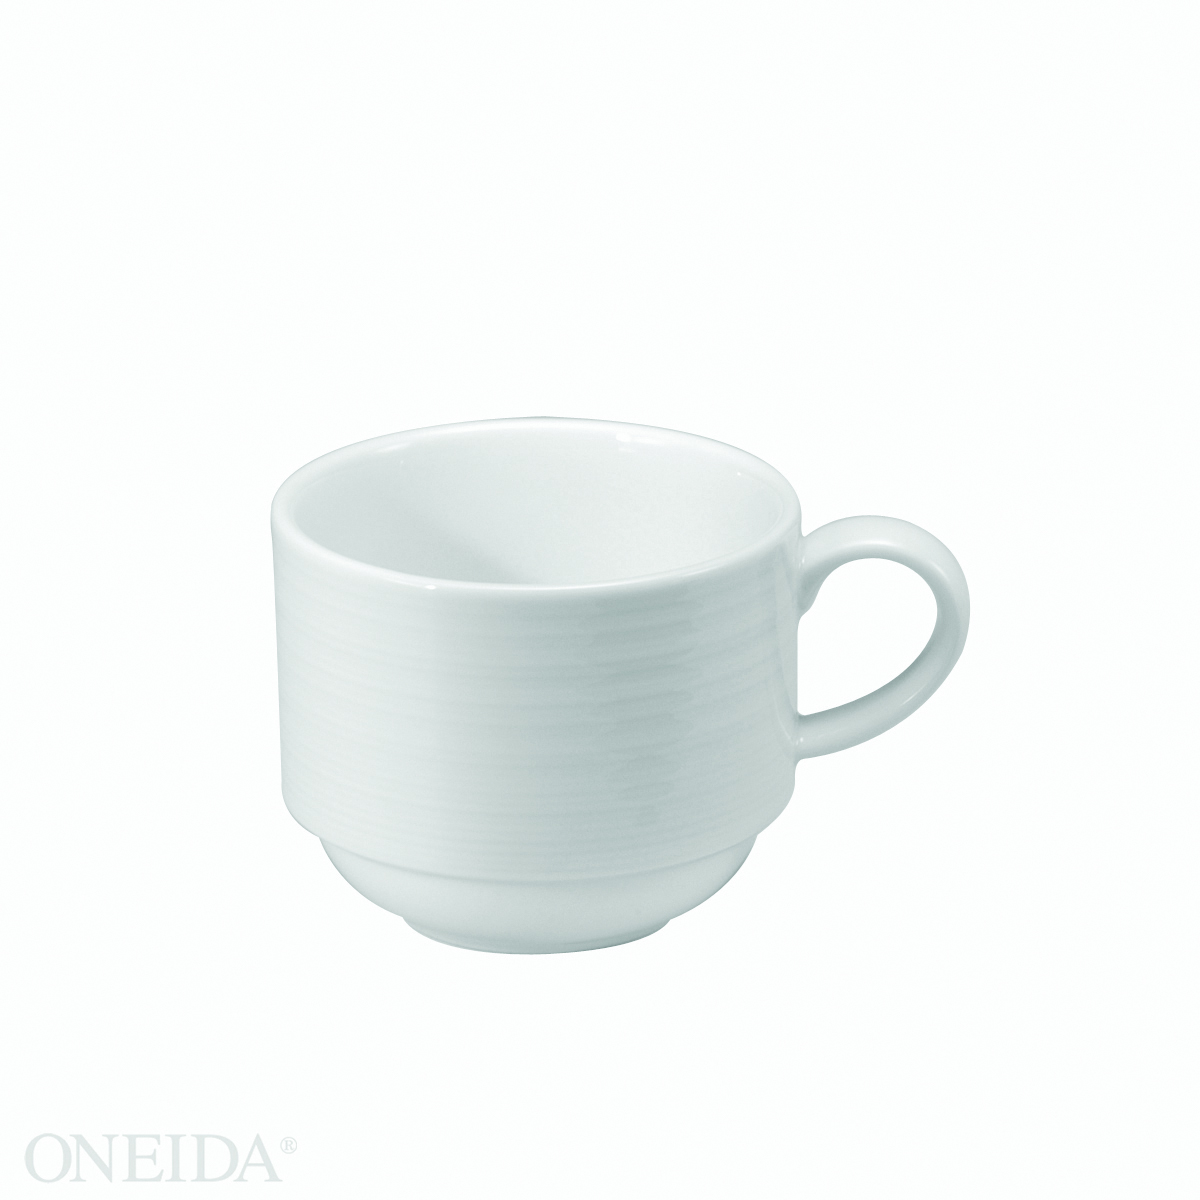 BOTTICELLI STACKING CUP, 9 OZ.